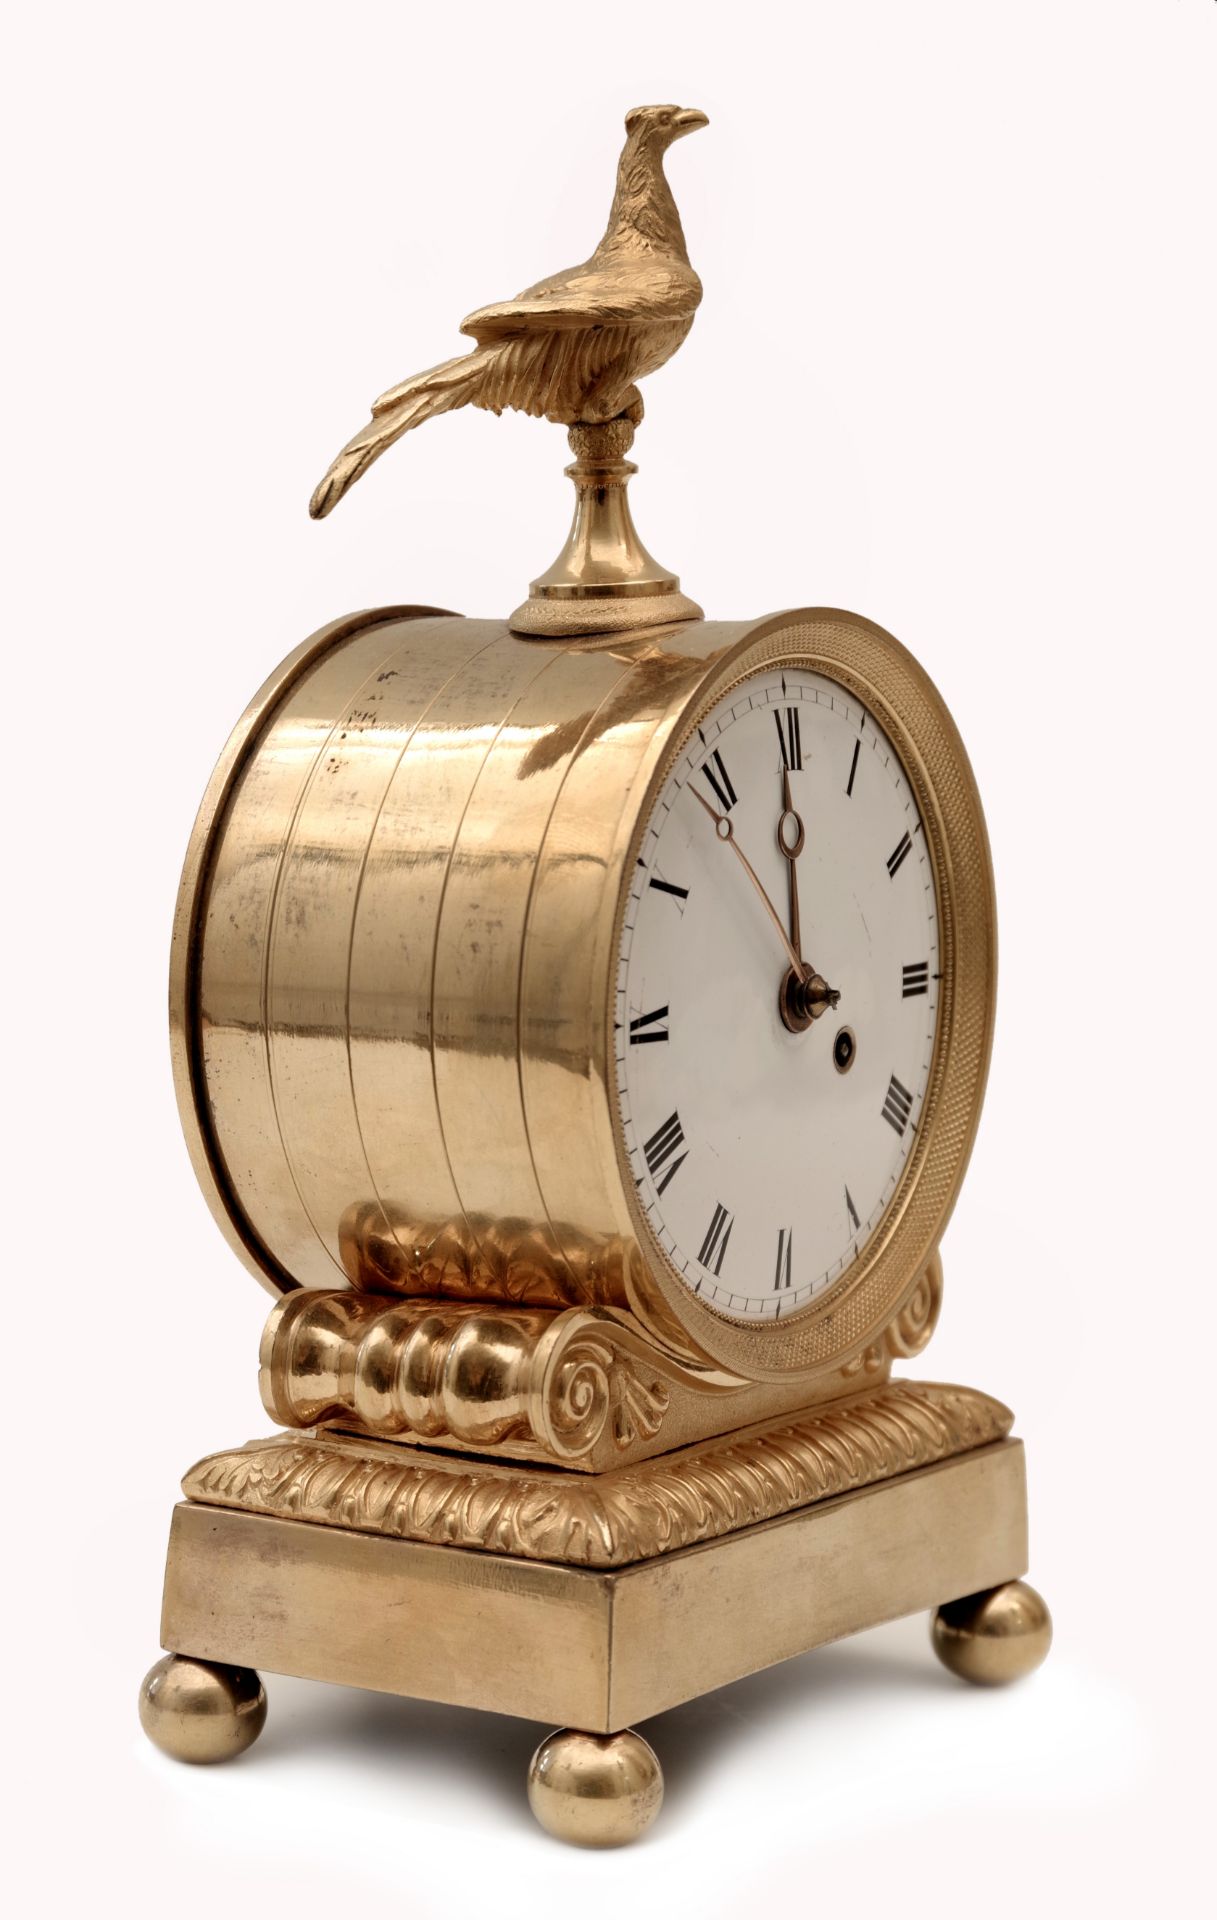 Small Empire-style clock - Image 4 of 4